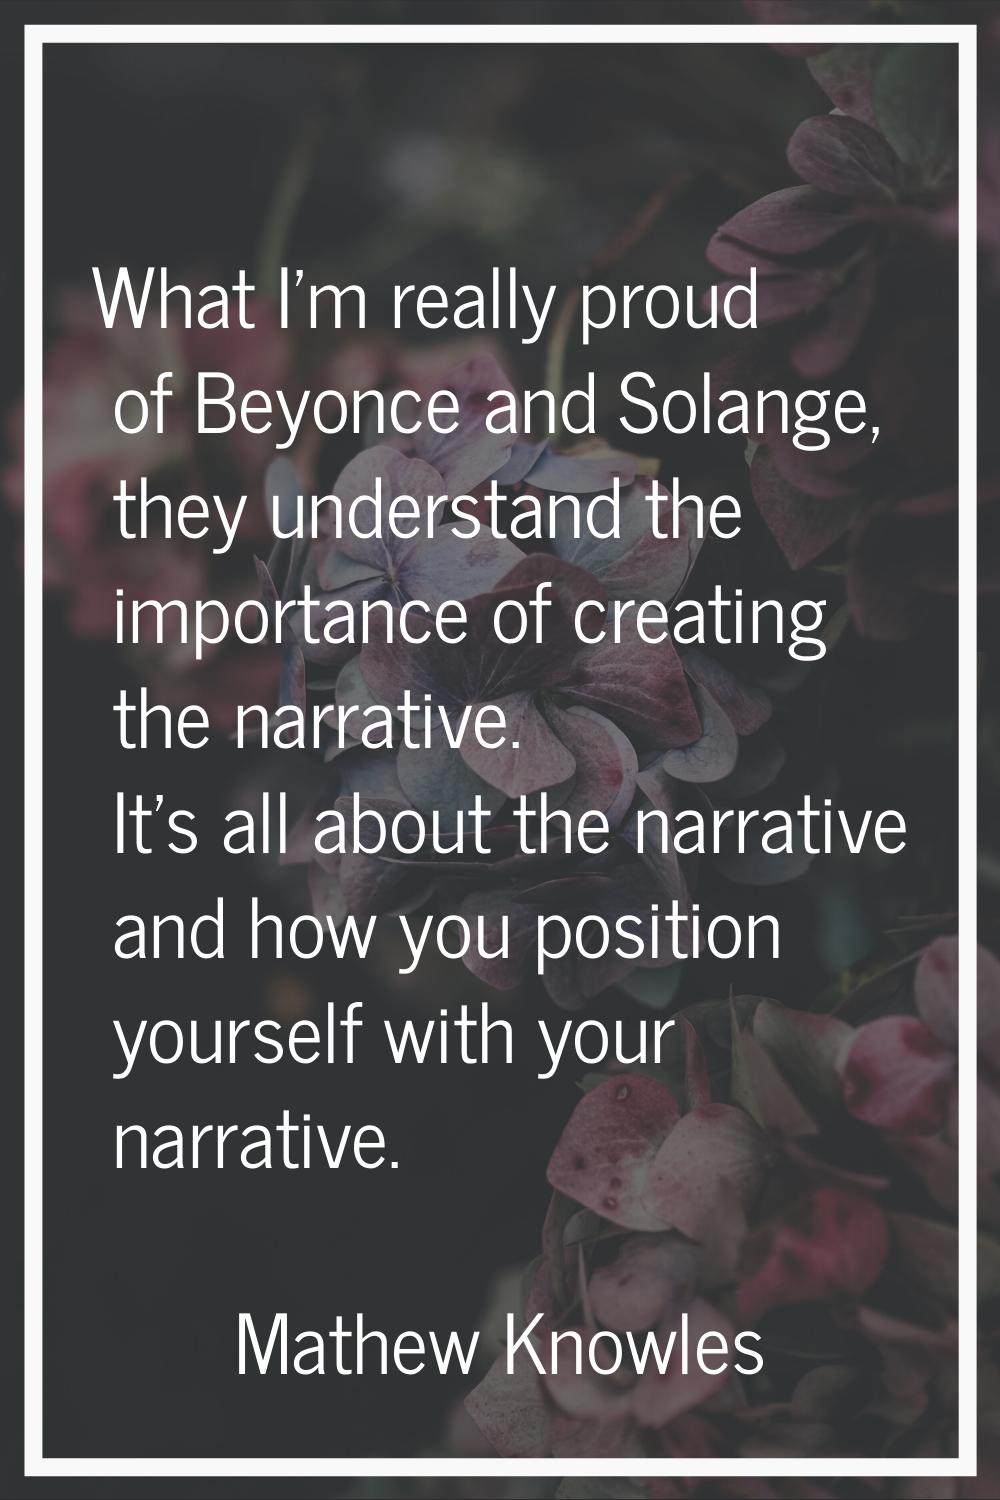 What I'm really proud of Beyonce and Solange, they understand the importance of creating the narrat